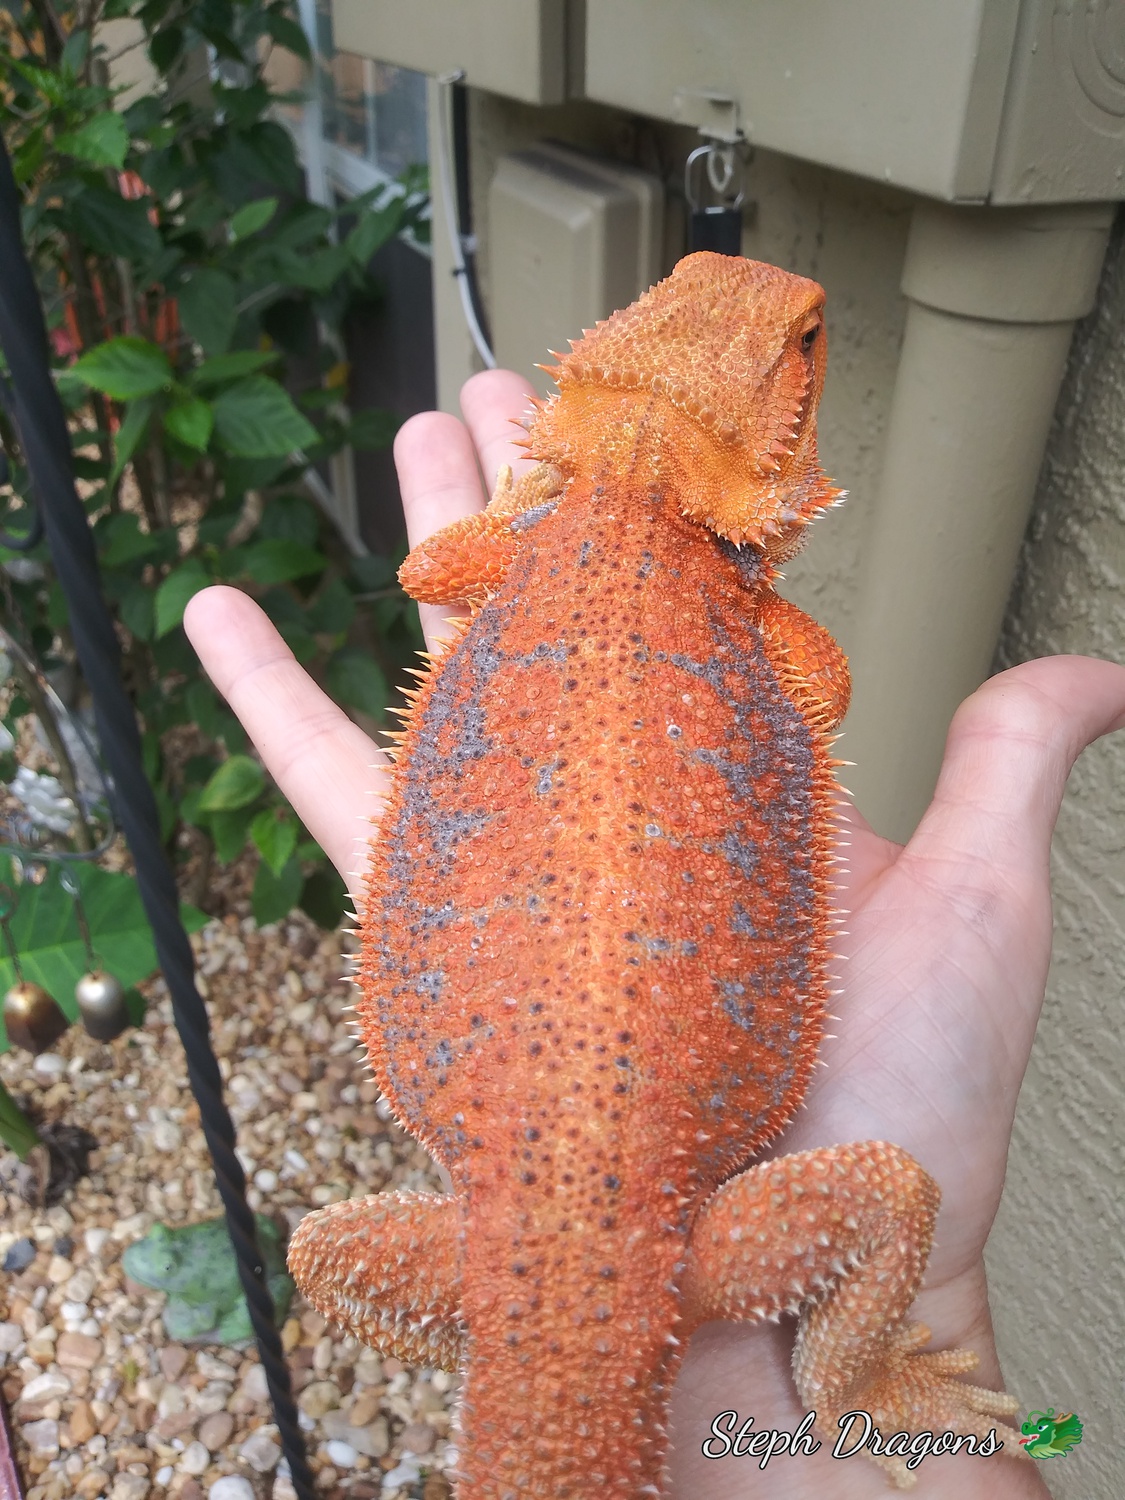 Red Dunner Hypo Het Tran Female Central Bearded Dragon by Steph dragons